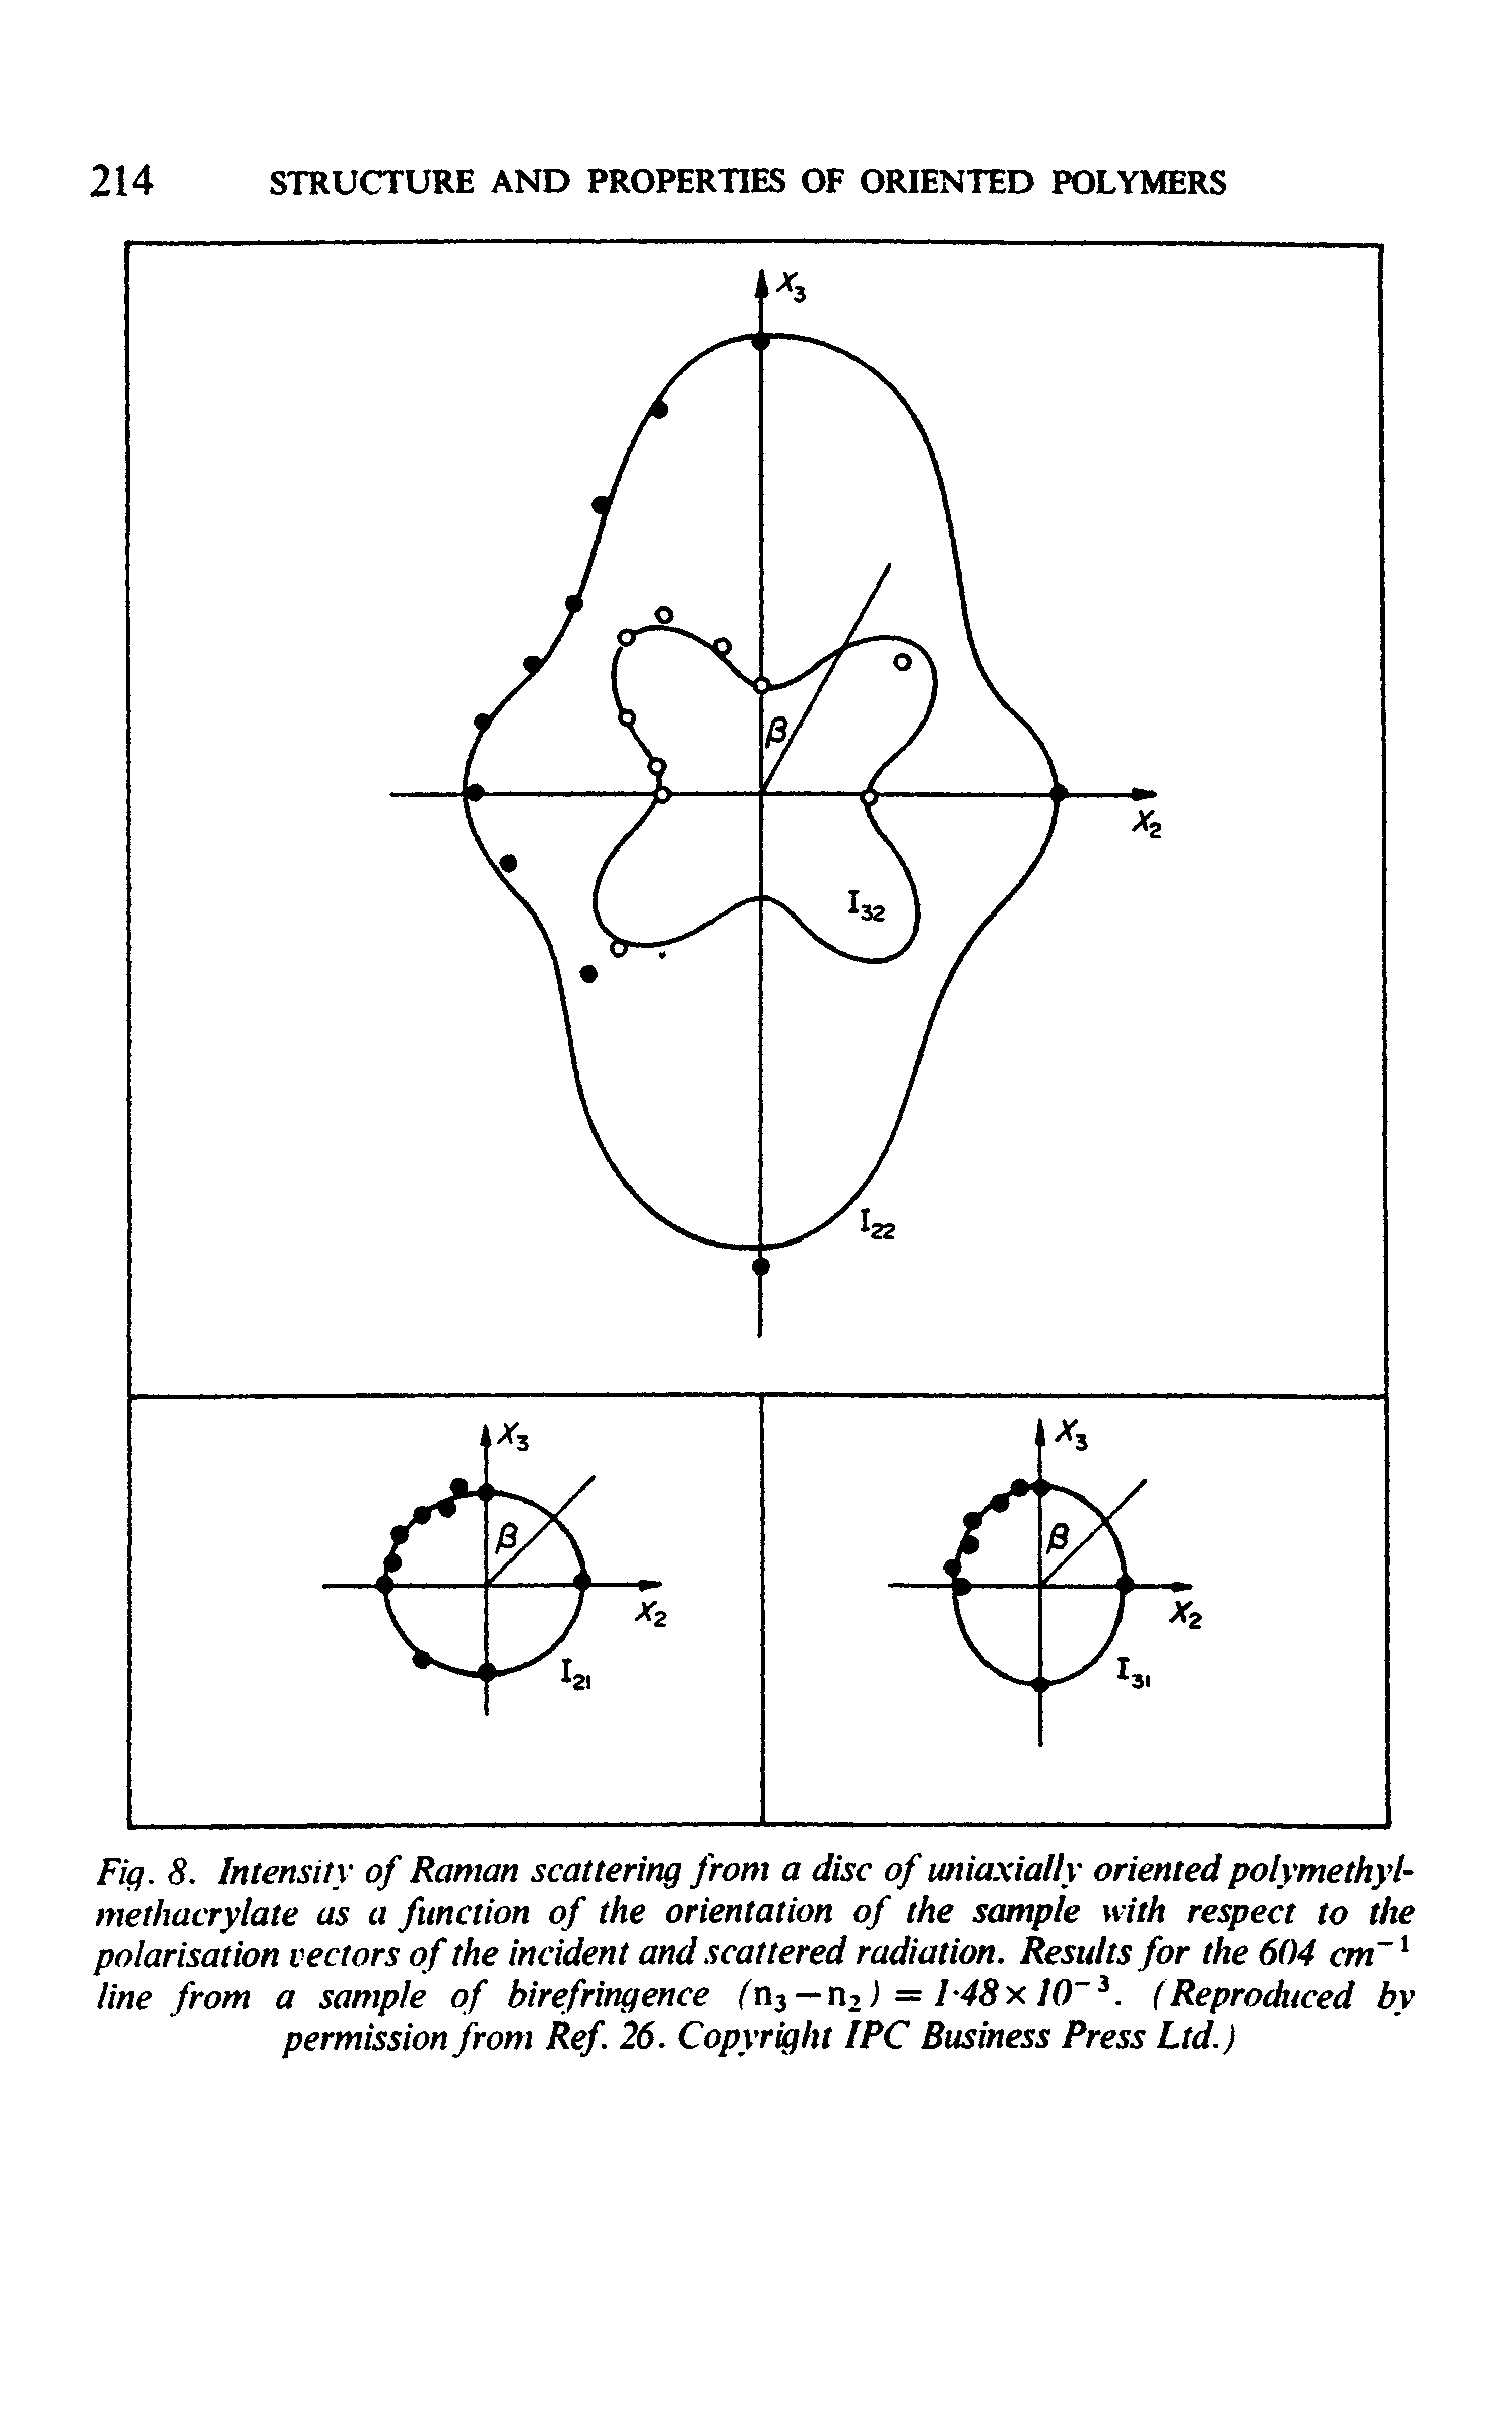 Fig. 8. Intensity of Raman scattering from a disc of miaxially oriented polymethylmethacrylate as a function of the orientation of the sample with respect to the polarisation vectors of the incident and scattered radiation. Results for the 604 cm line from a sample of birefringence /"nj —ri2 J (Reproduced by...